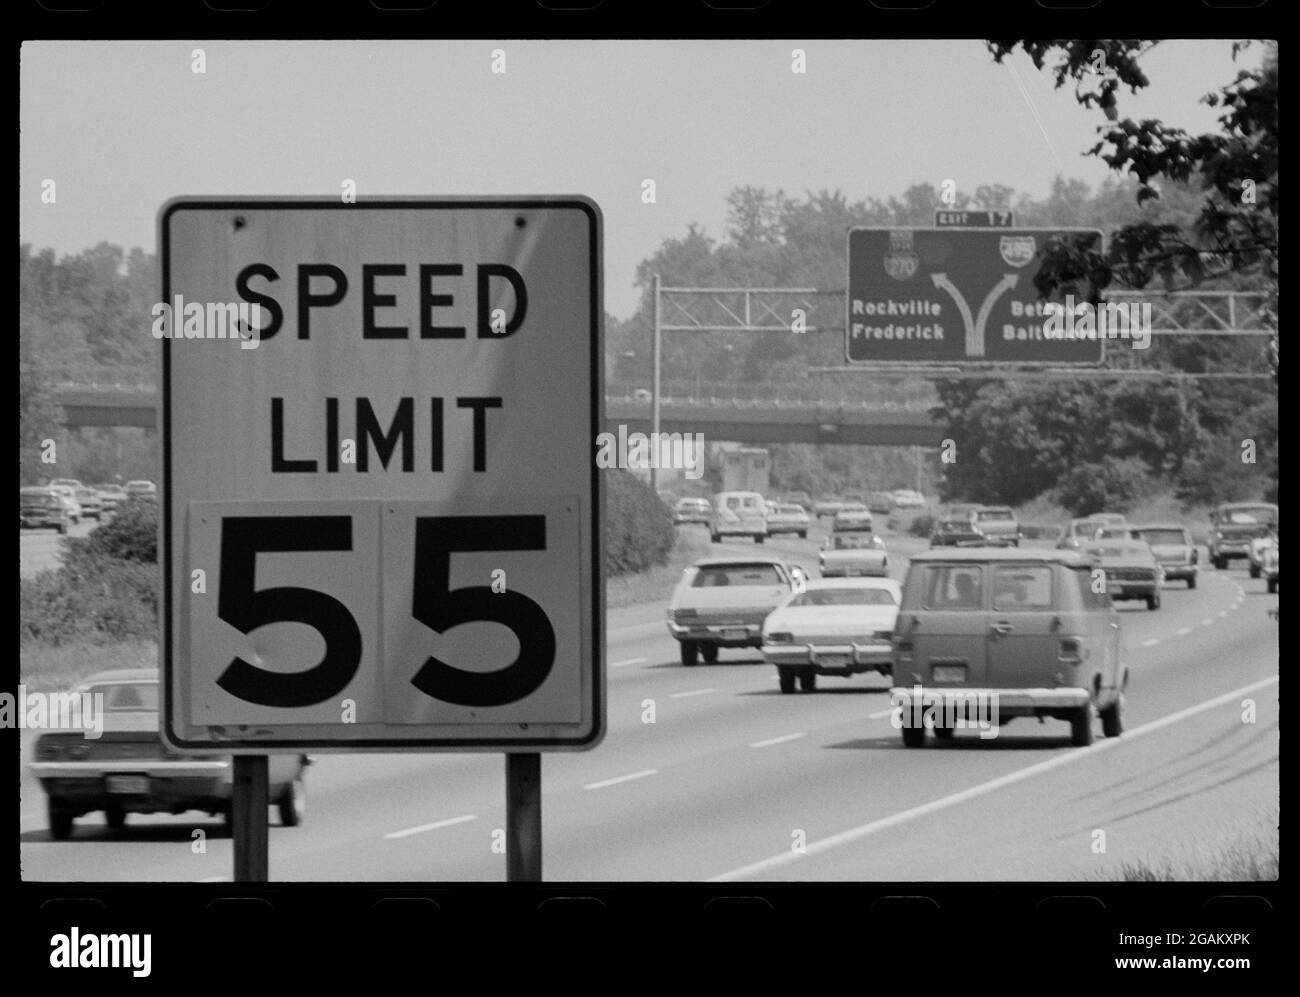 The National Maximum Speed Limit of 55 mph, as posted here on the  Washington Beltway, was enacted by the federal government of the United  States in 1974 in response to the 1973